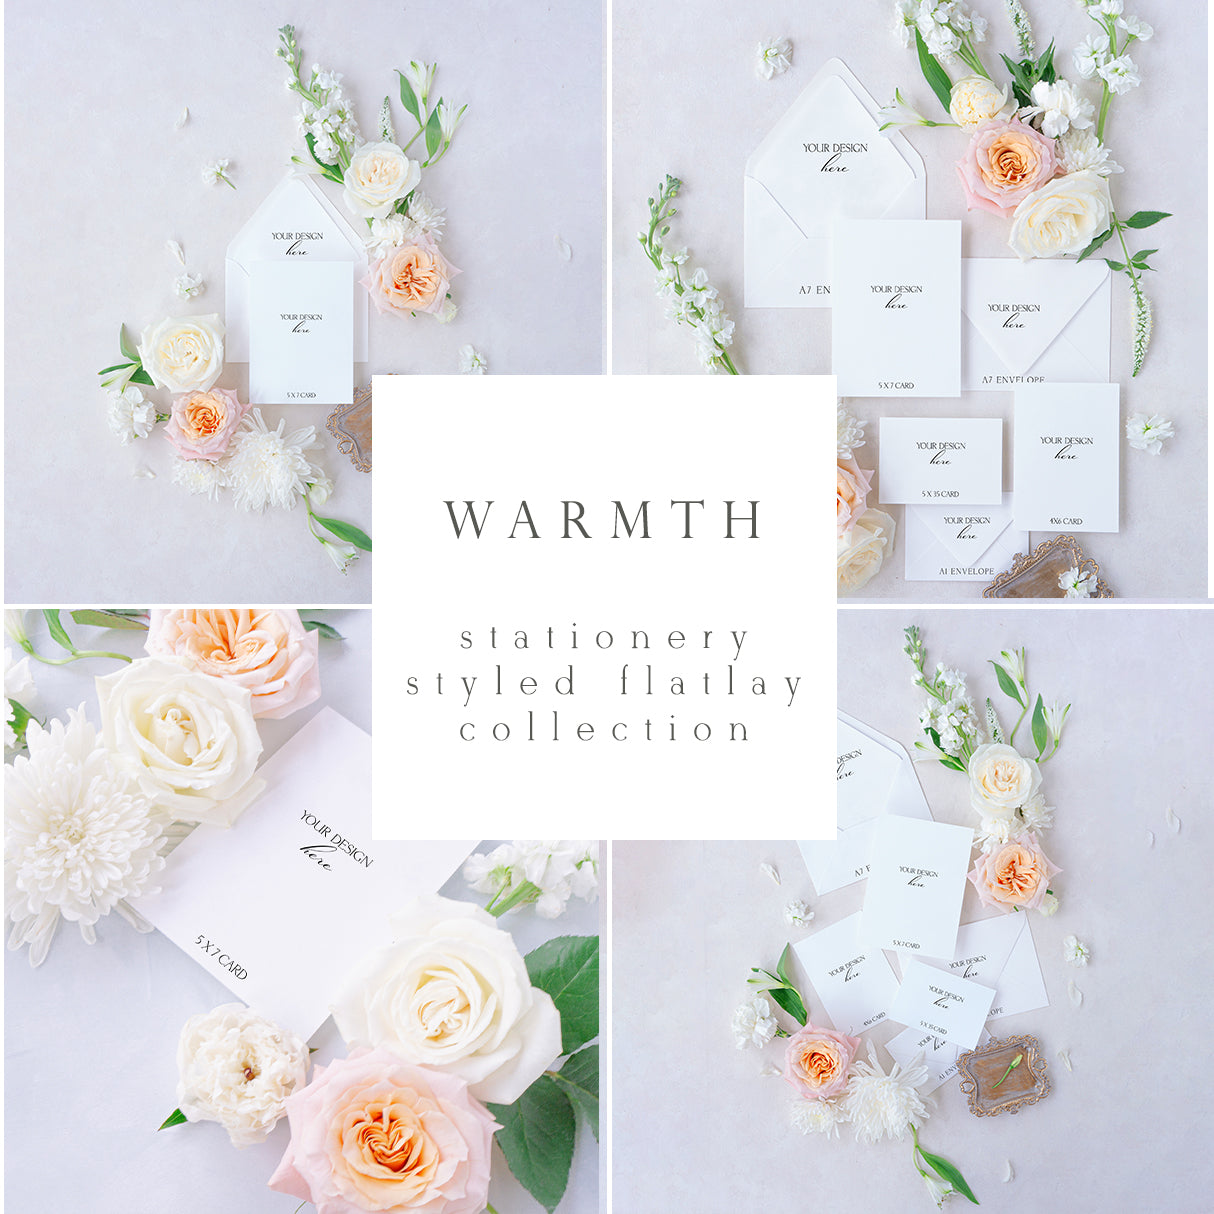 Warmth collection